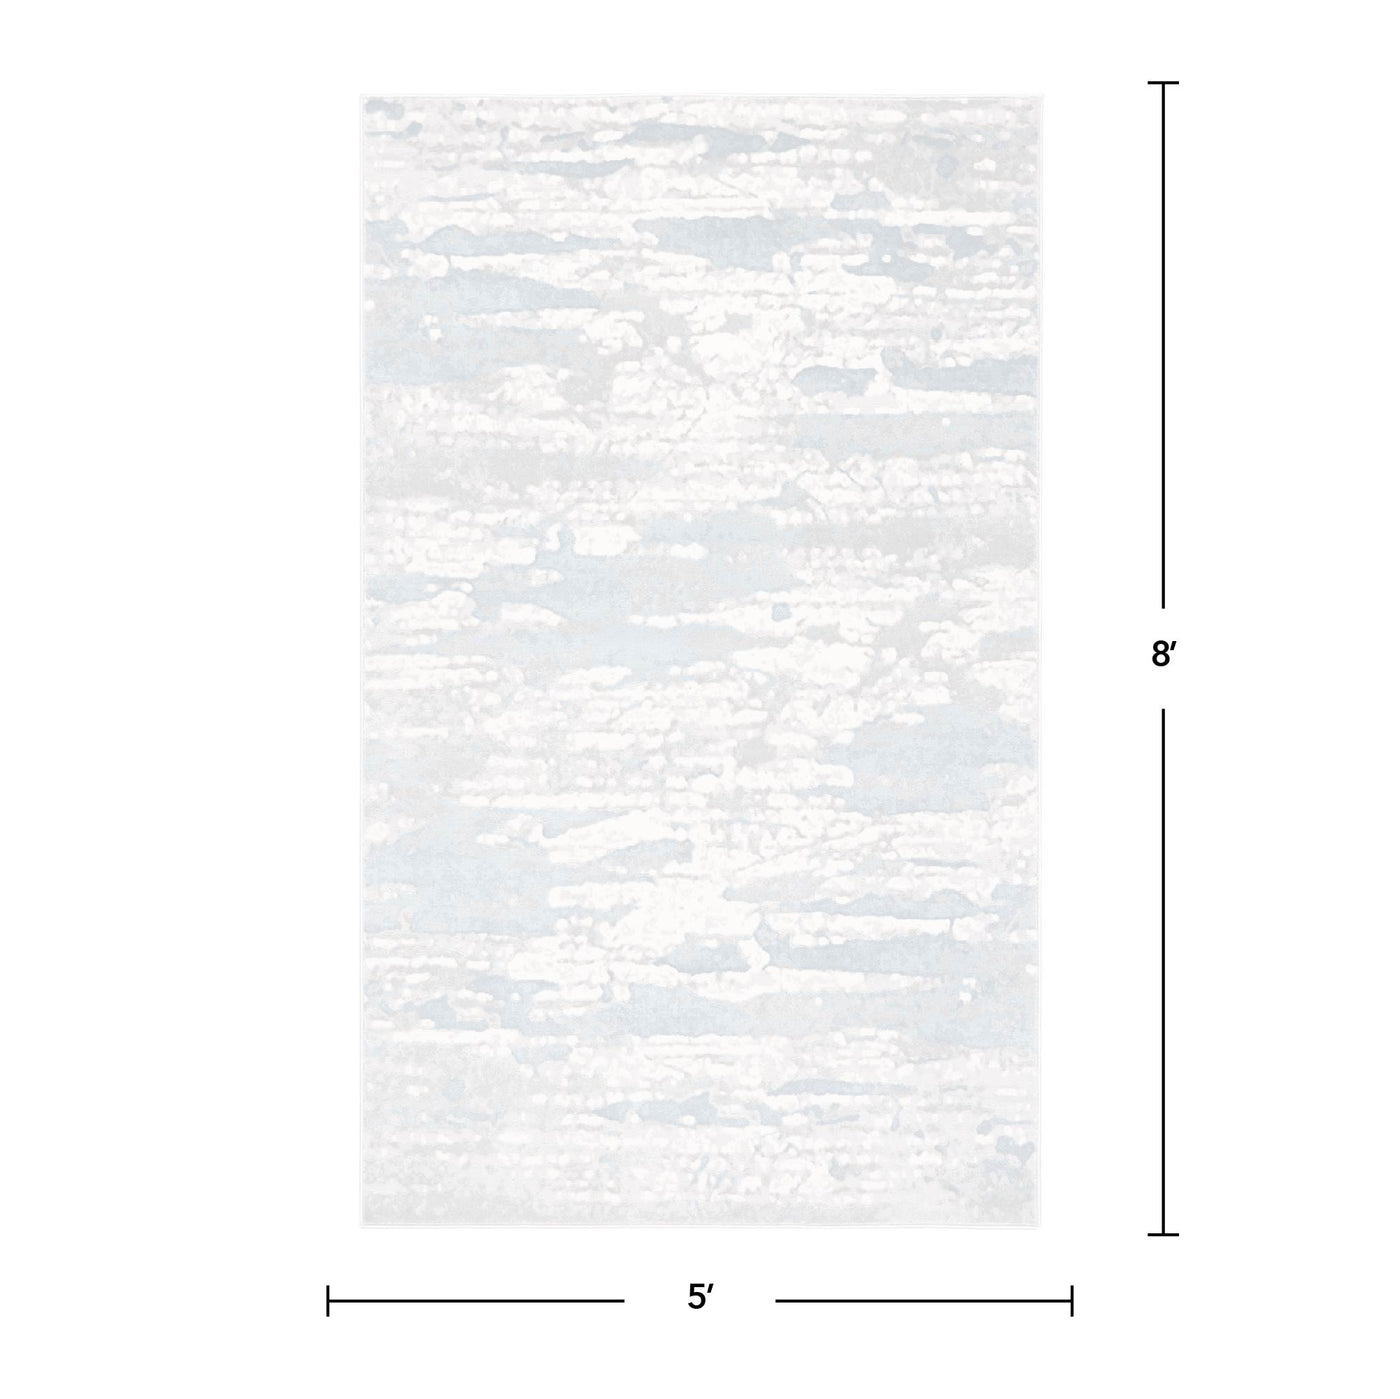 FirsTime & Co. Blue Watercolor Abstract Area Rug, Modern Style, Made of Polyester and Polypropylene Blend